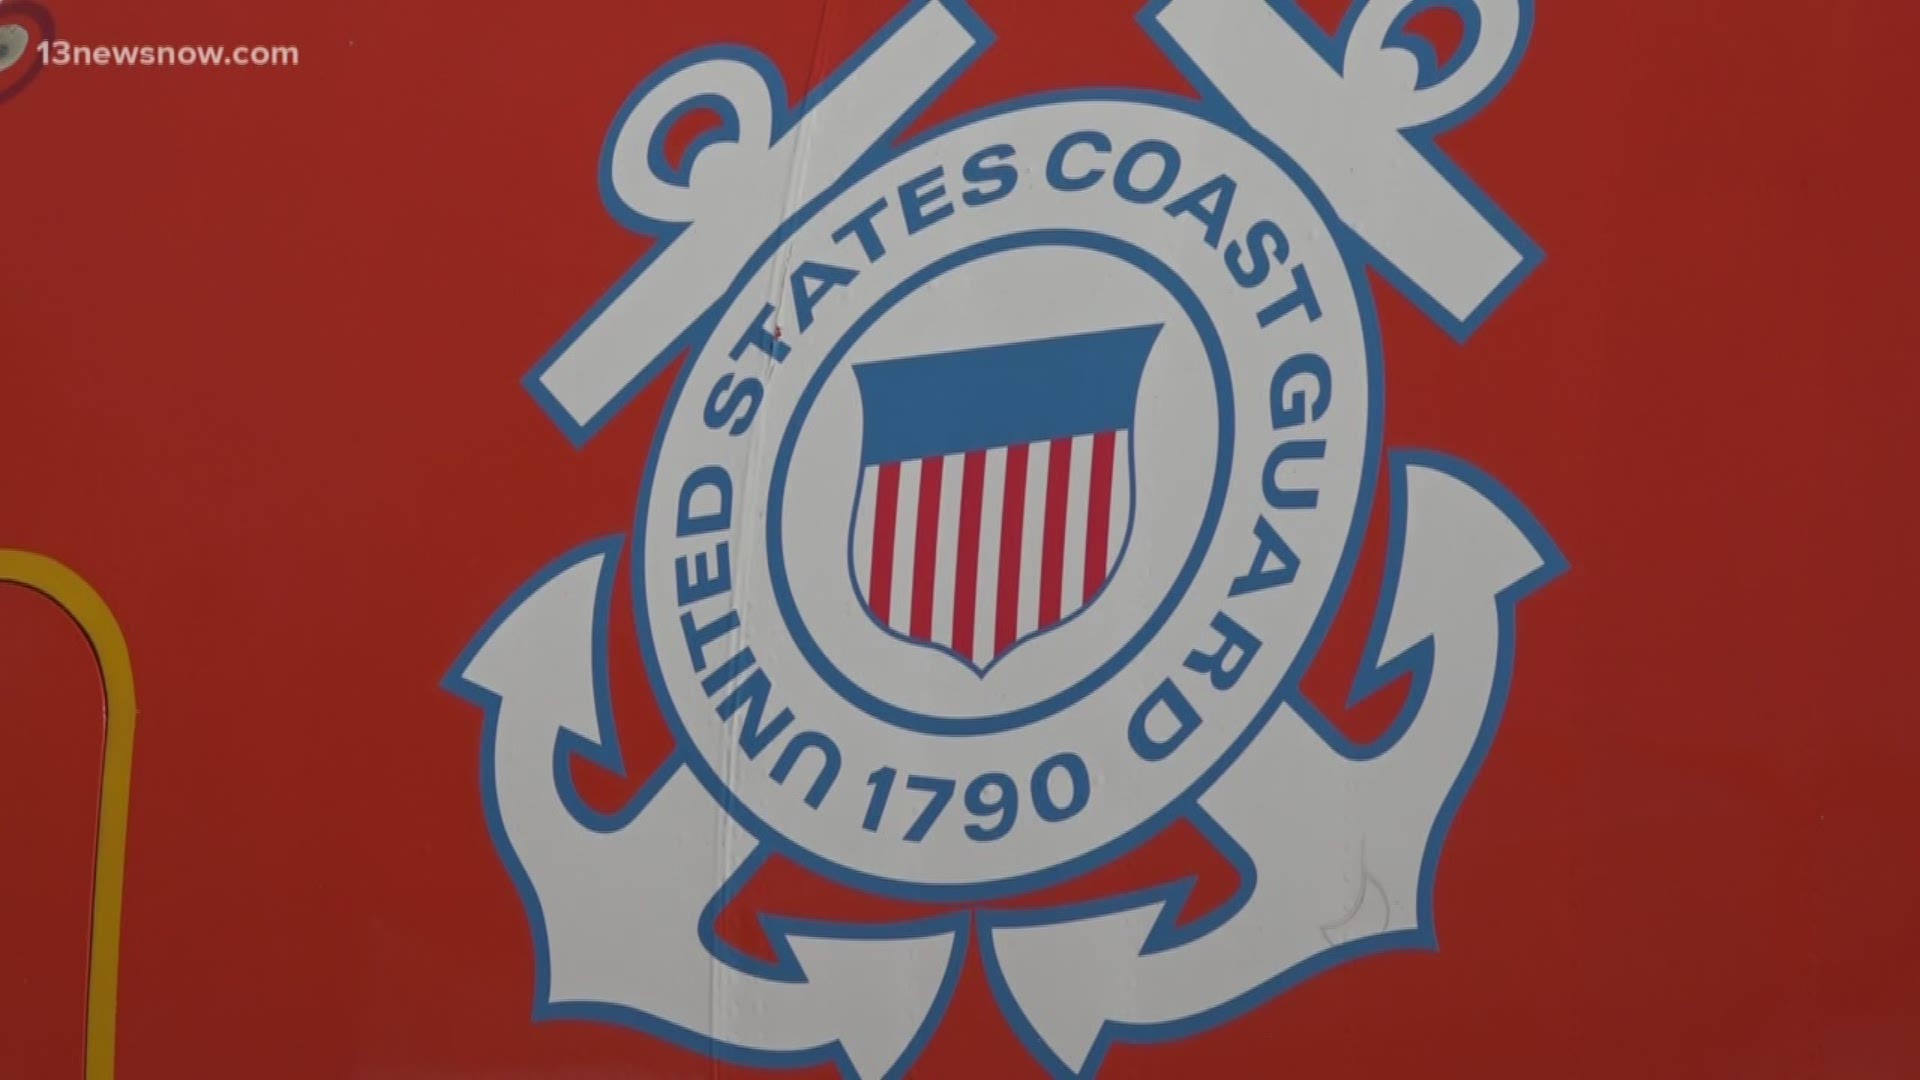 The Coast Guard's top leader said the organization needs more money to live up to its motto "always ready."